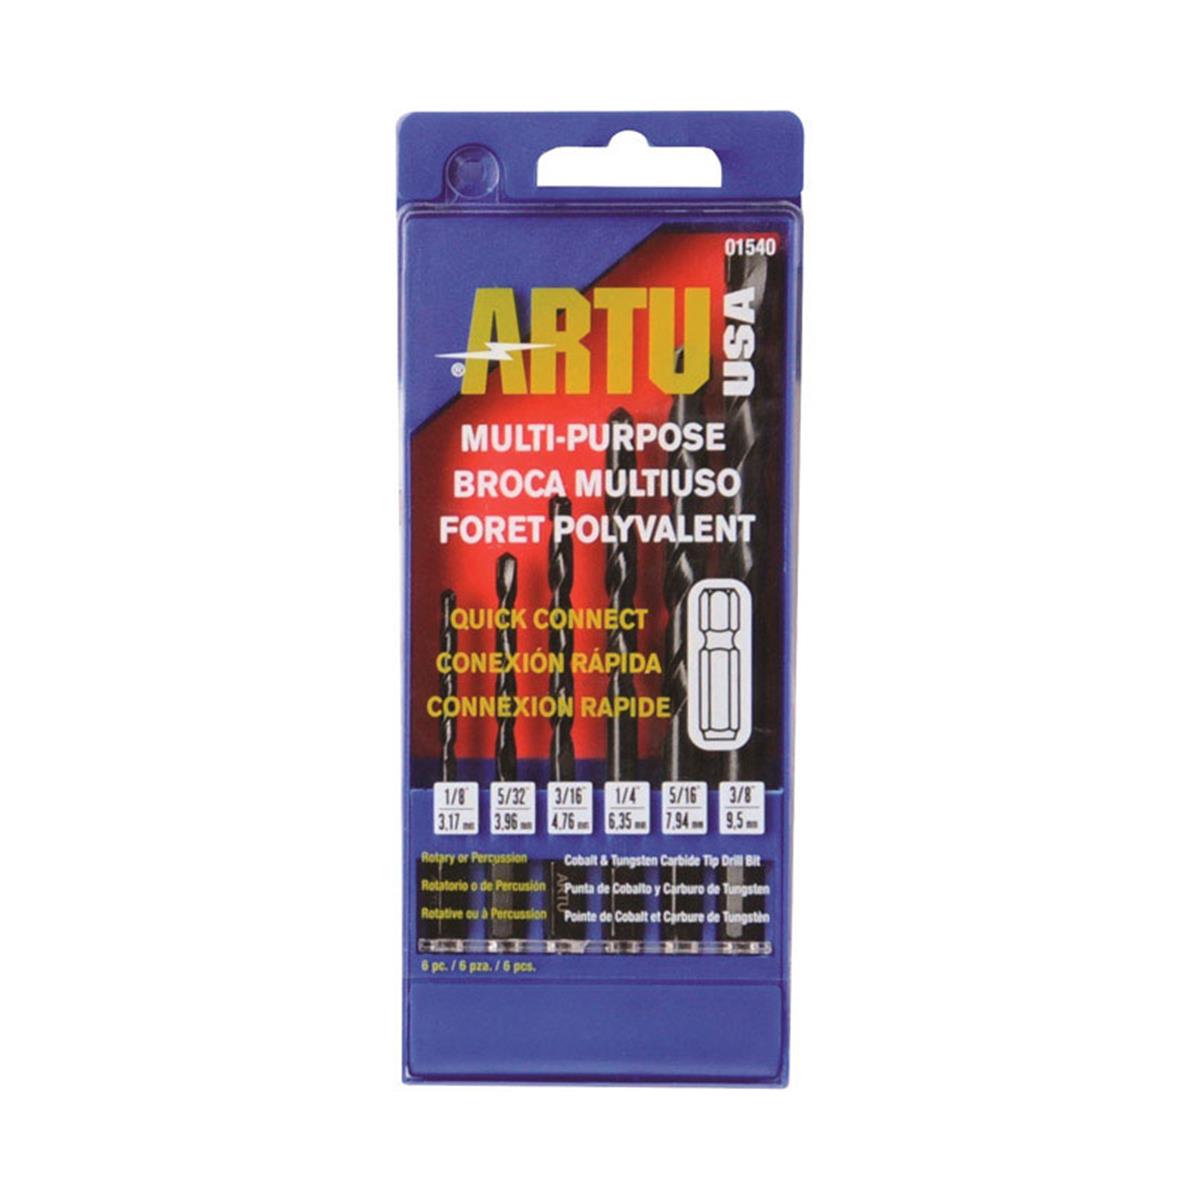 Picture of Artu 2497295 6 Piece Carbide Tipped Quick-Change Hex Shank Drill Bit Set, Assorted Size